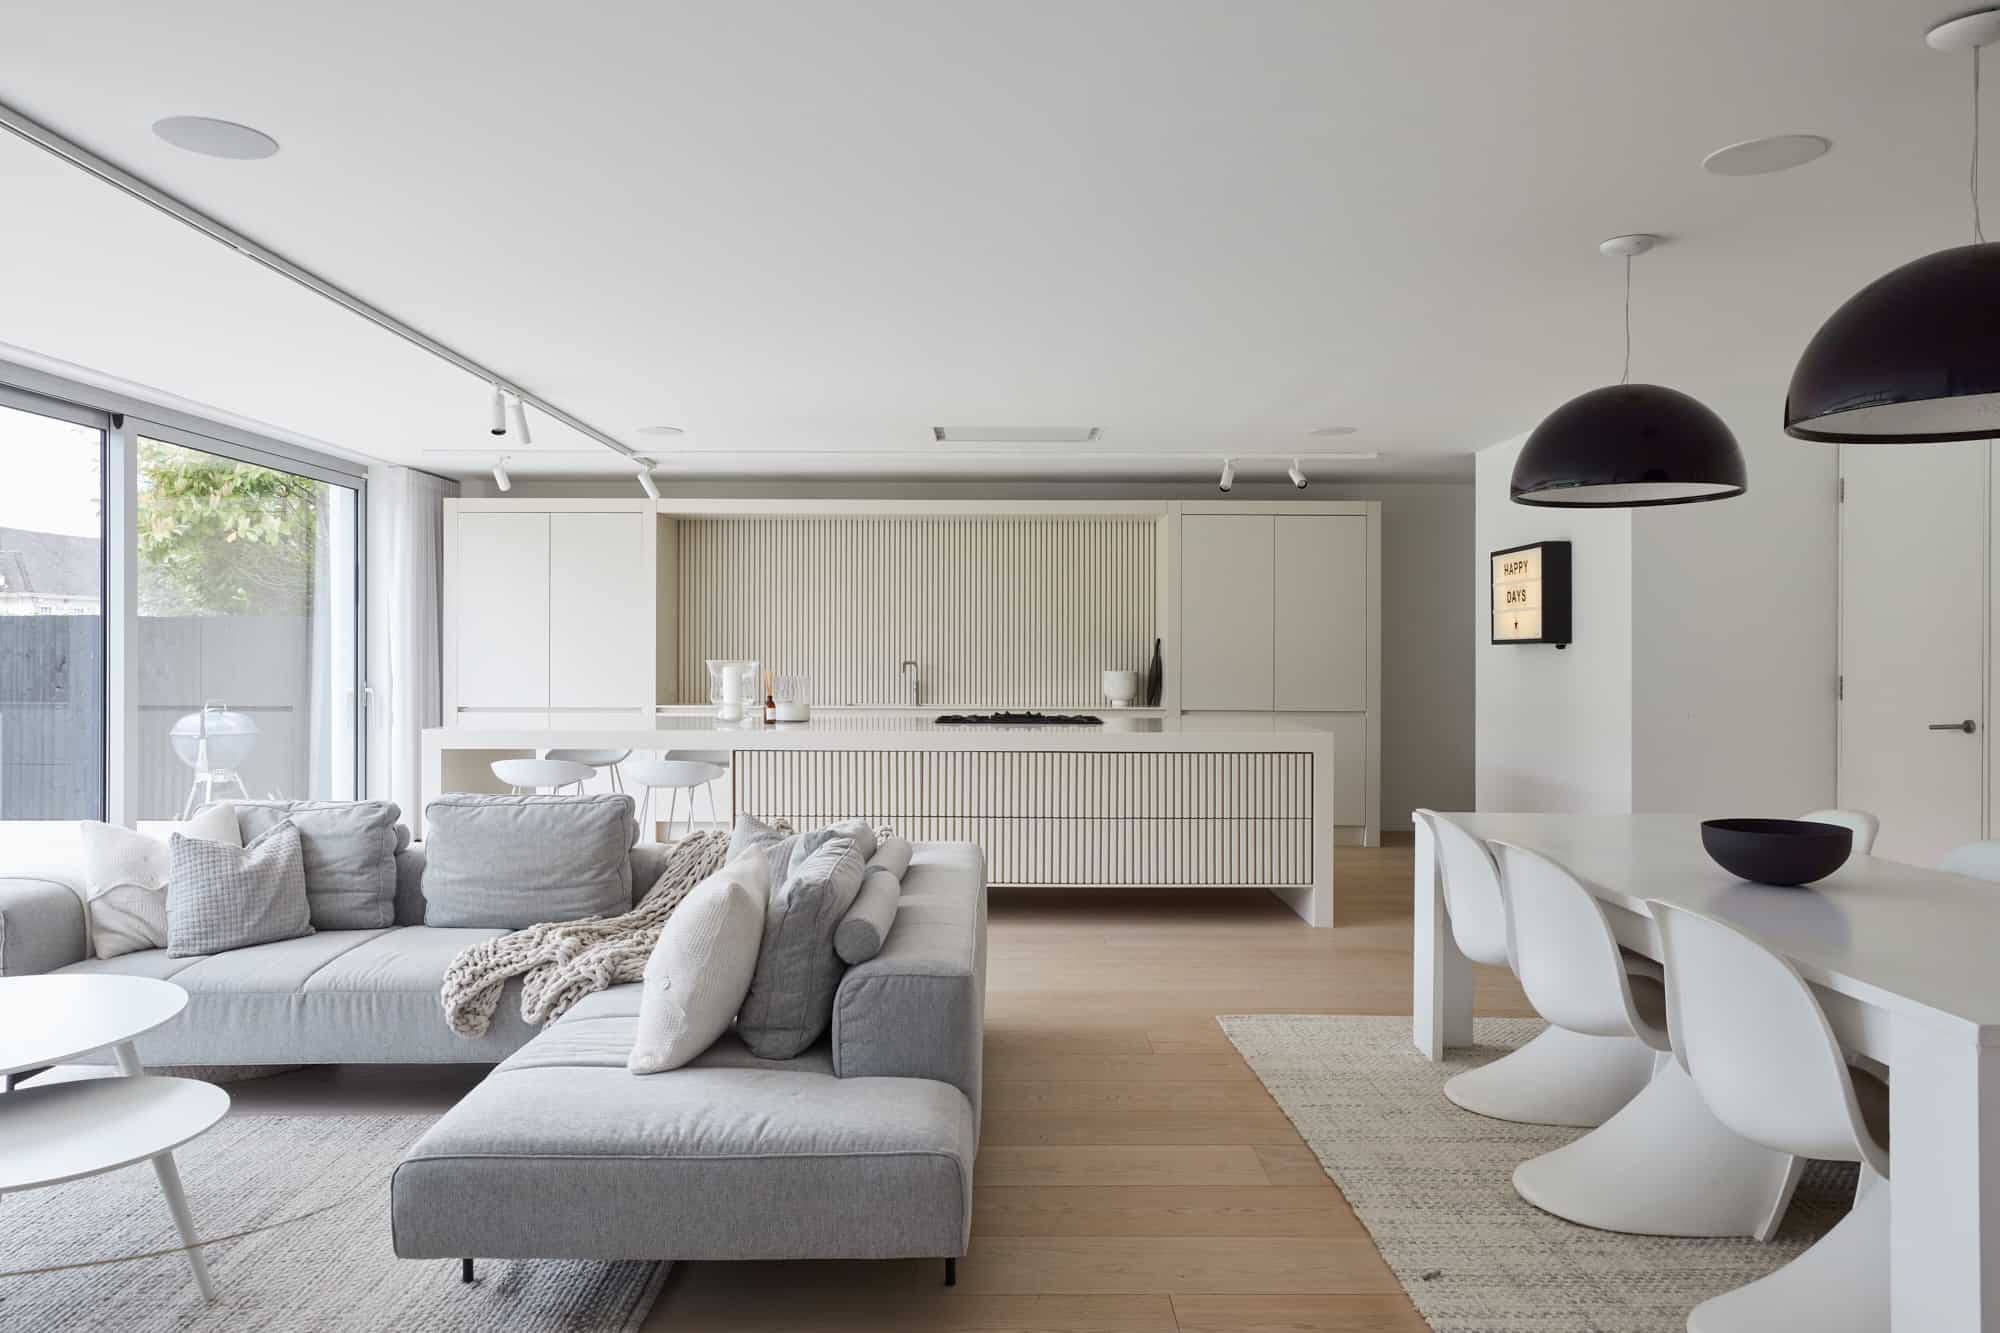 White House BR1 - A contemporary home with clean lines and spacious interiors furnished and decorated in neutral tones throughout - The Location Guys